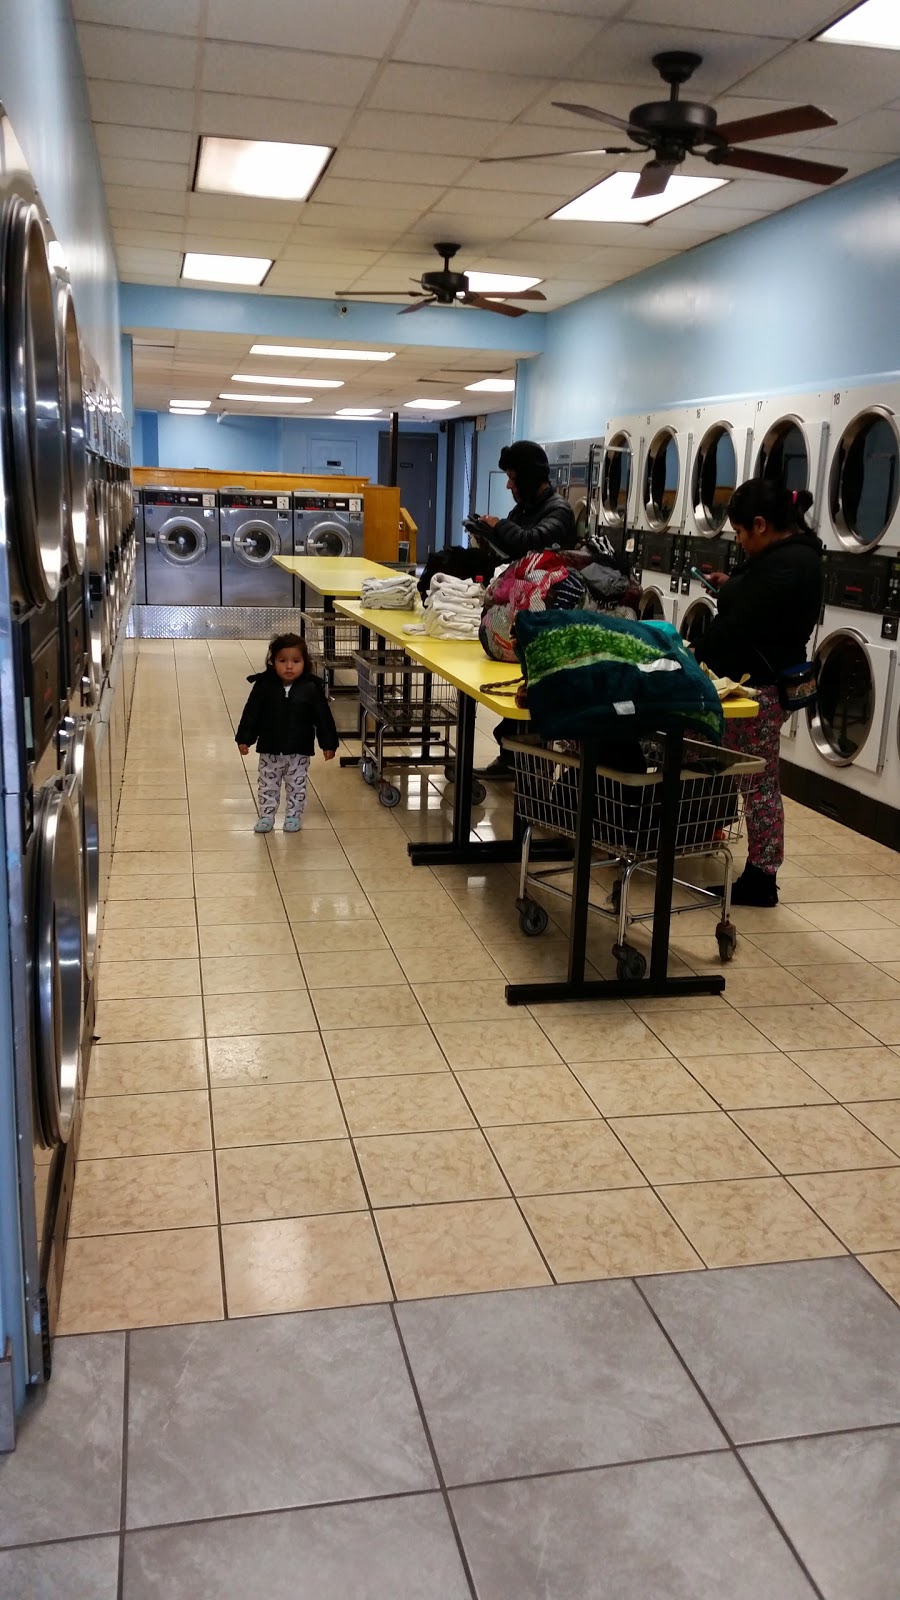 Hudson Plaza Laundromat & Dry Cleaners | 2585 South Rd, Poughkeepsie, NY 12601 | Phone: (845) 471-8356